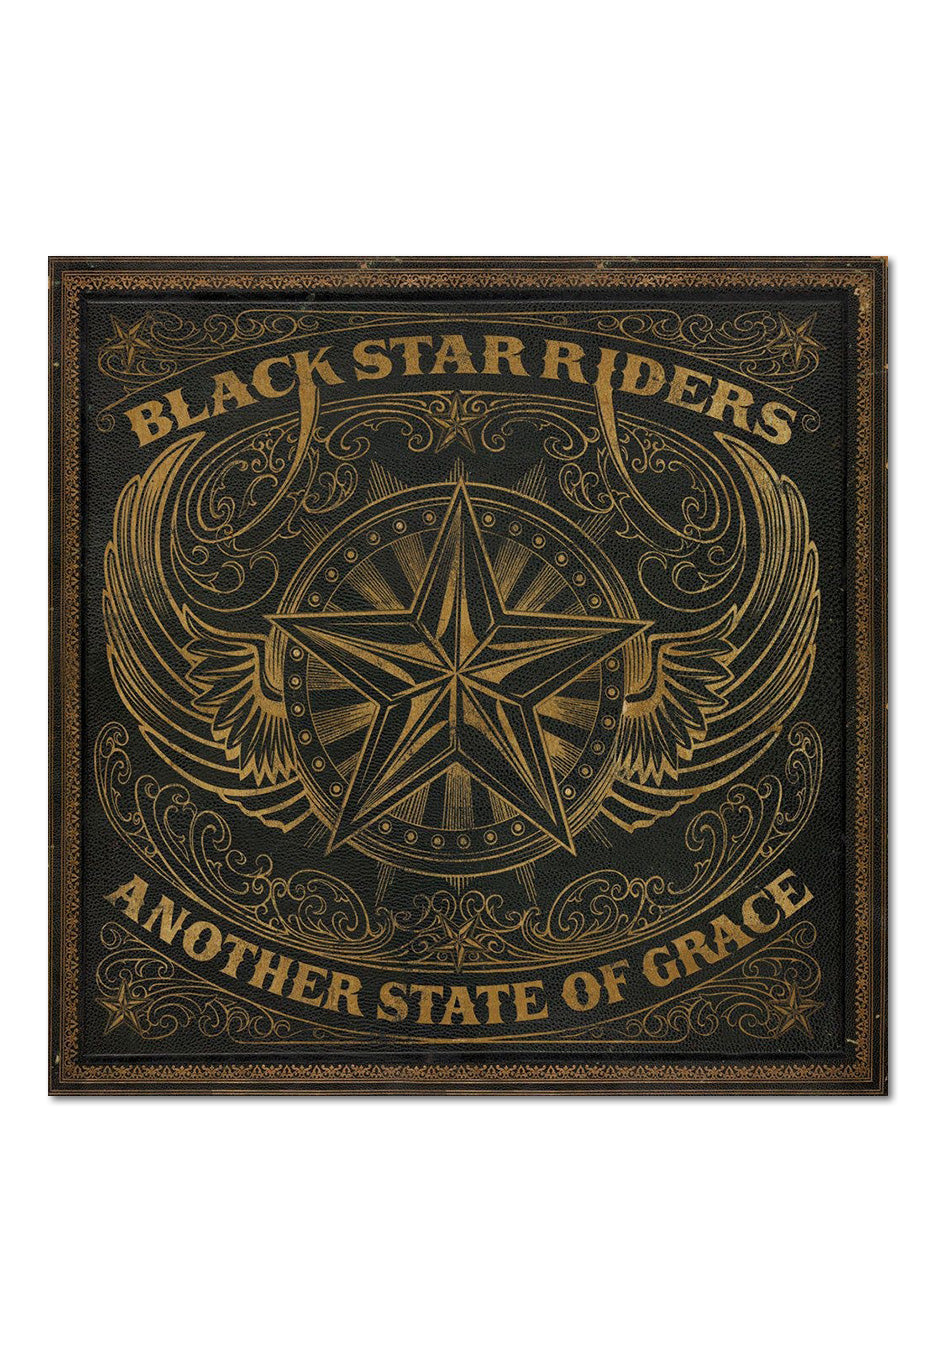 Black Star Riders - Another State Of Grace - CD